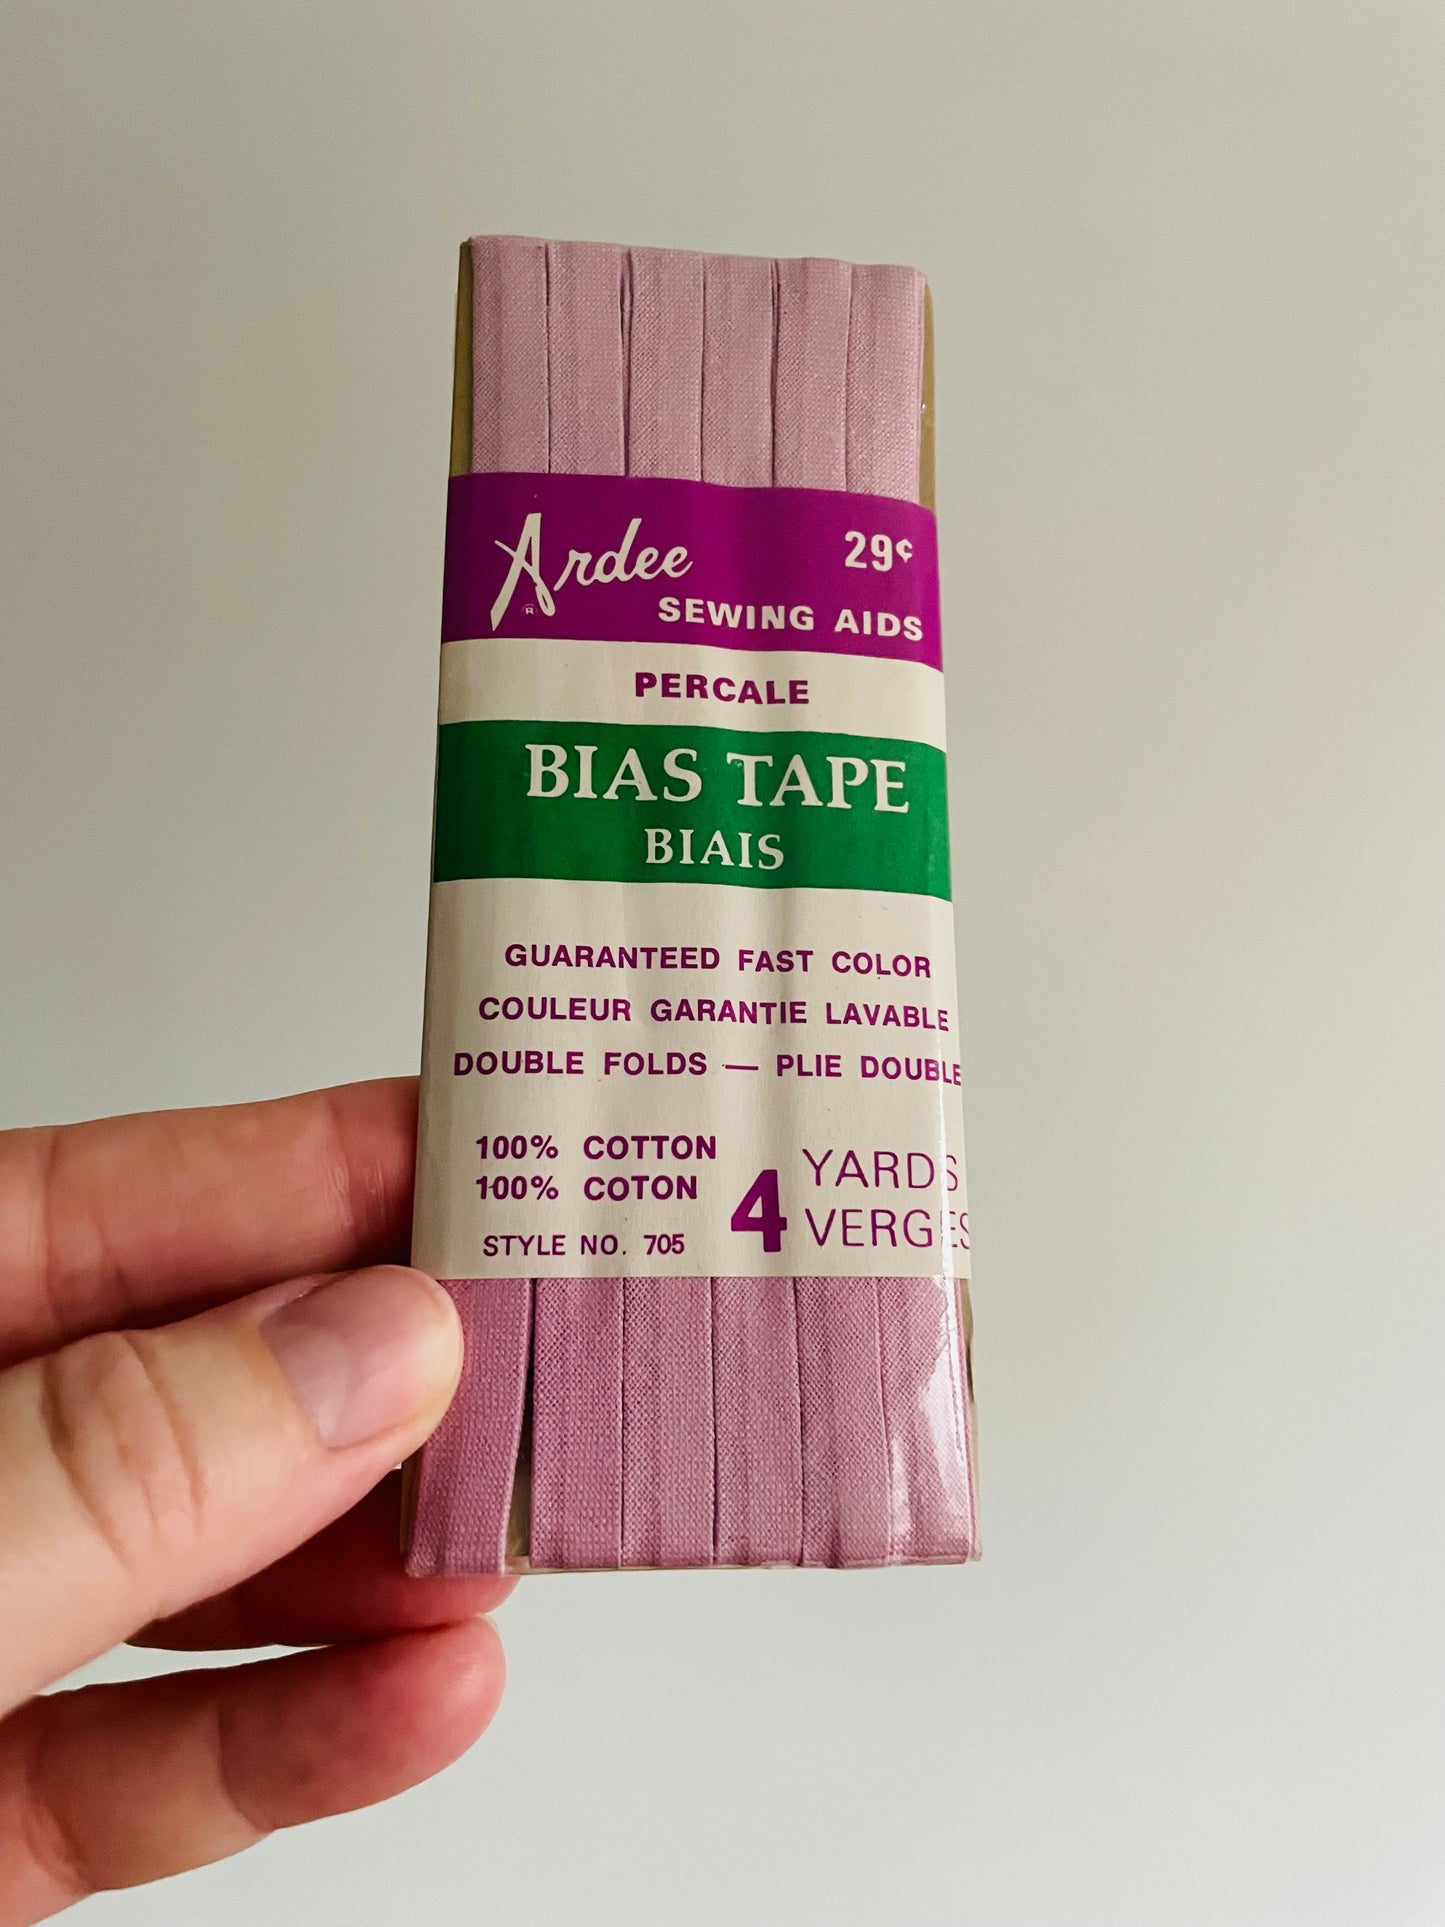 Shades of Purple Corticelli & Ardee Double Fold Bias Tape - Brand New Vintage in Original Packaging - Set of 5